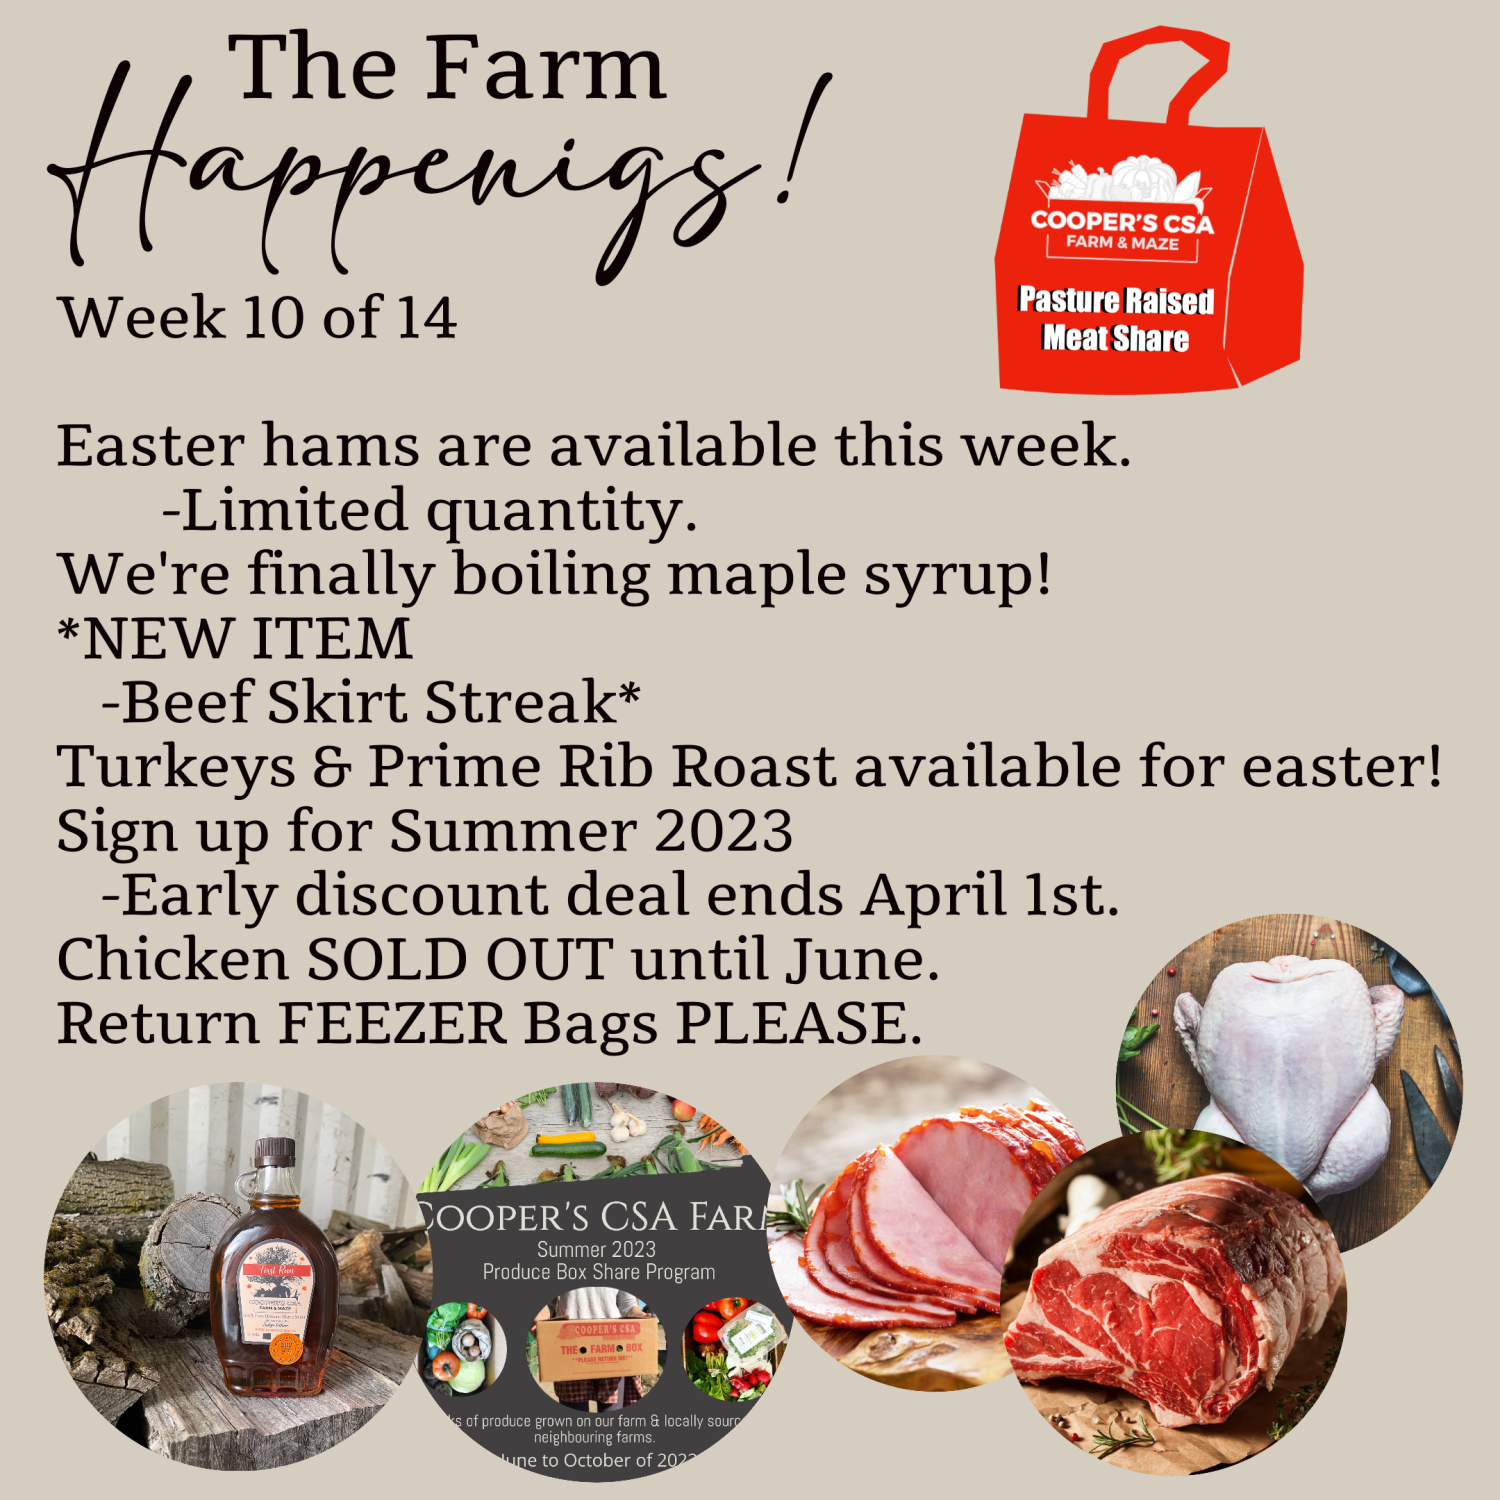 Previous Happening: "Pasture Meat Shares"-Coopers CSA Farm Farm Happenings Week 10"